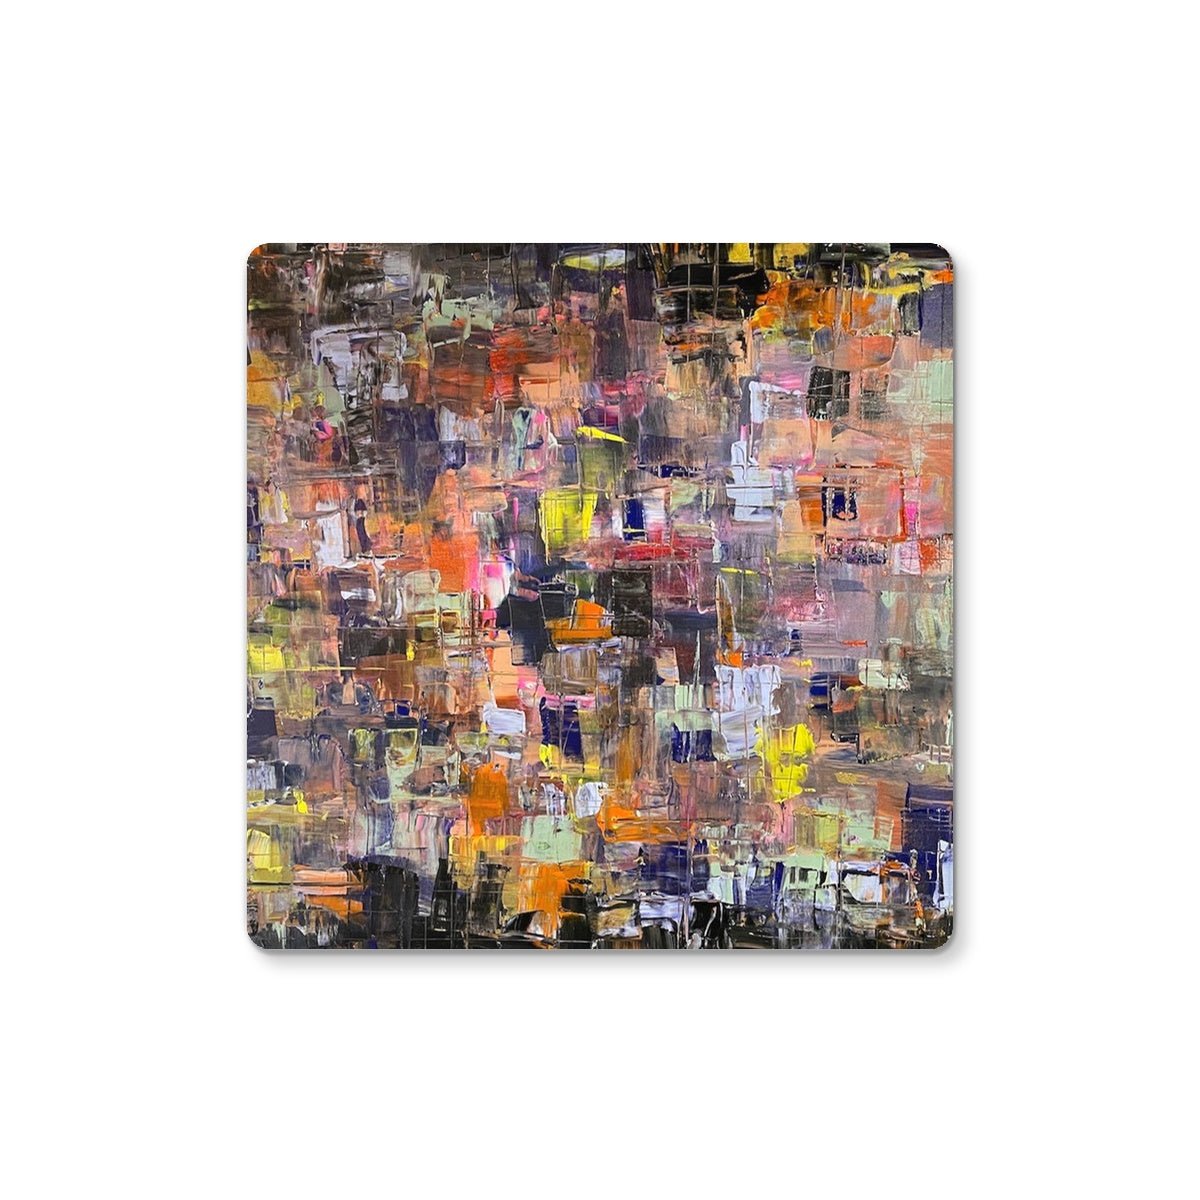 Never Enough Art Gifts Coaster-Coasters-Abstract & Impressionistic Art Gallery-Single Coaster-Paintings, Prints, Homeware, Art Gifts From Scotland By Scottish Artist Kevin Hunter